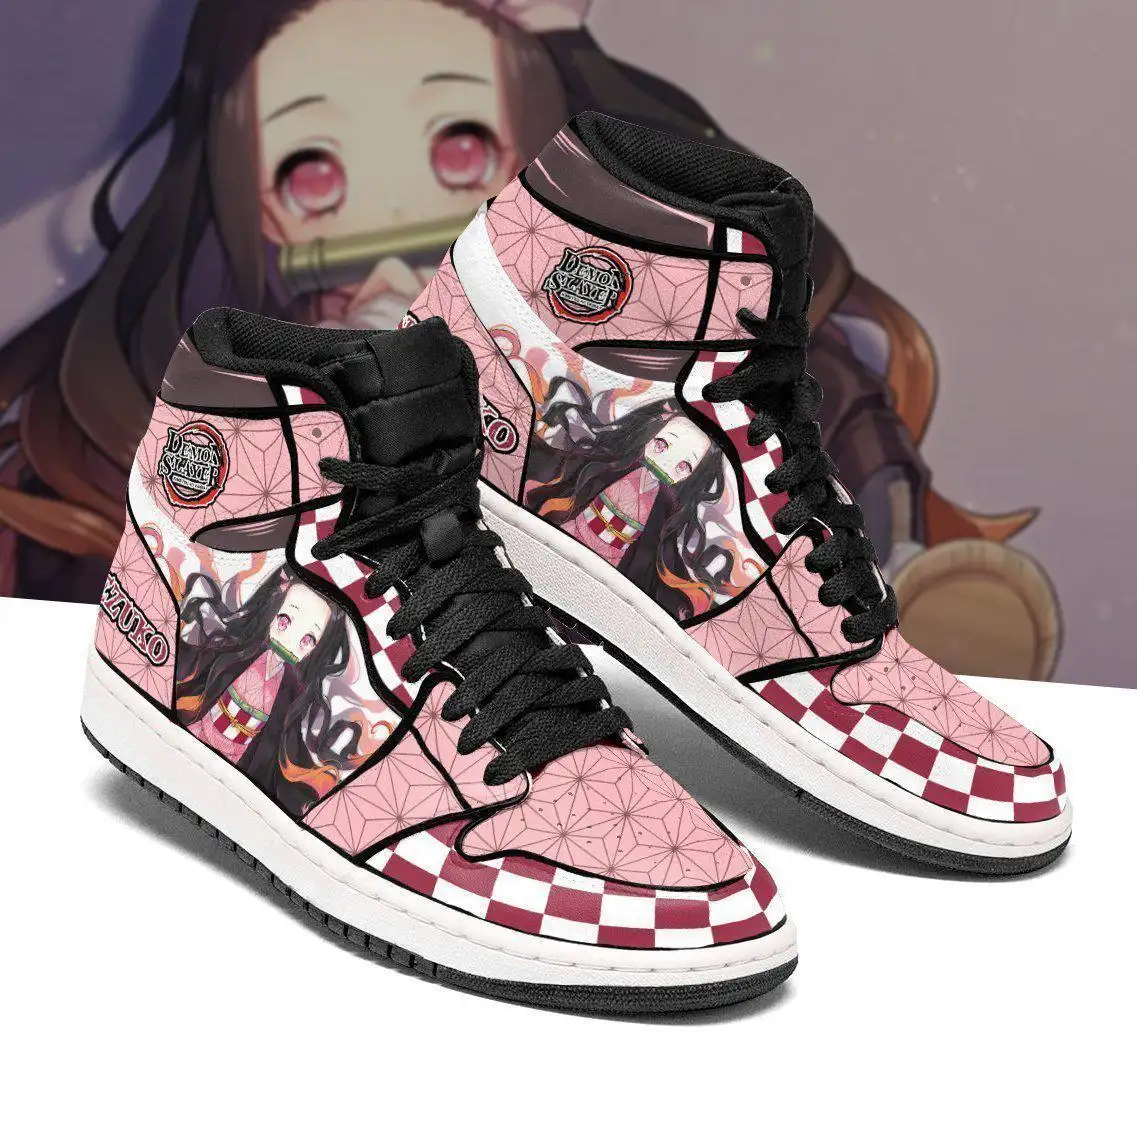 Shoe Store AF  Dropshipping Anime Shoes Cosplay Anime Sneakers For Men  Shoes Women Running Basketball Sneakers High Top Casual Shoes Size 3546   httprvivlyAClDSN  Facebook